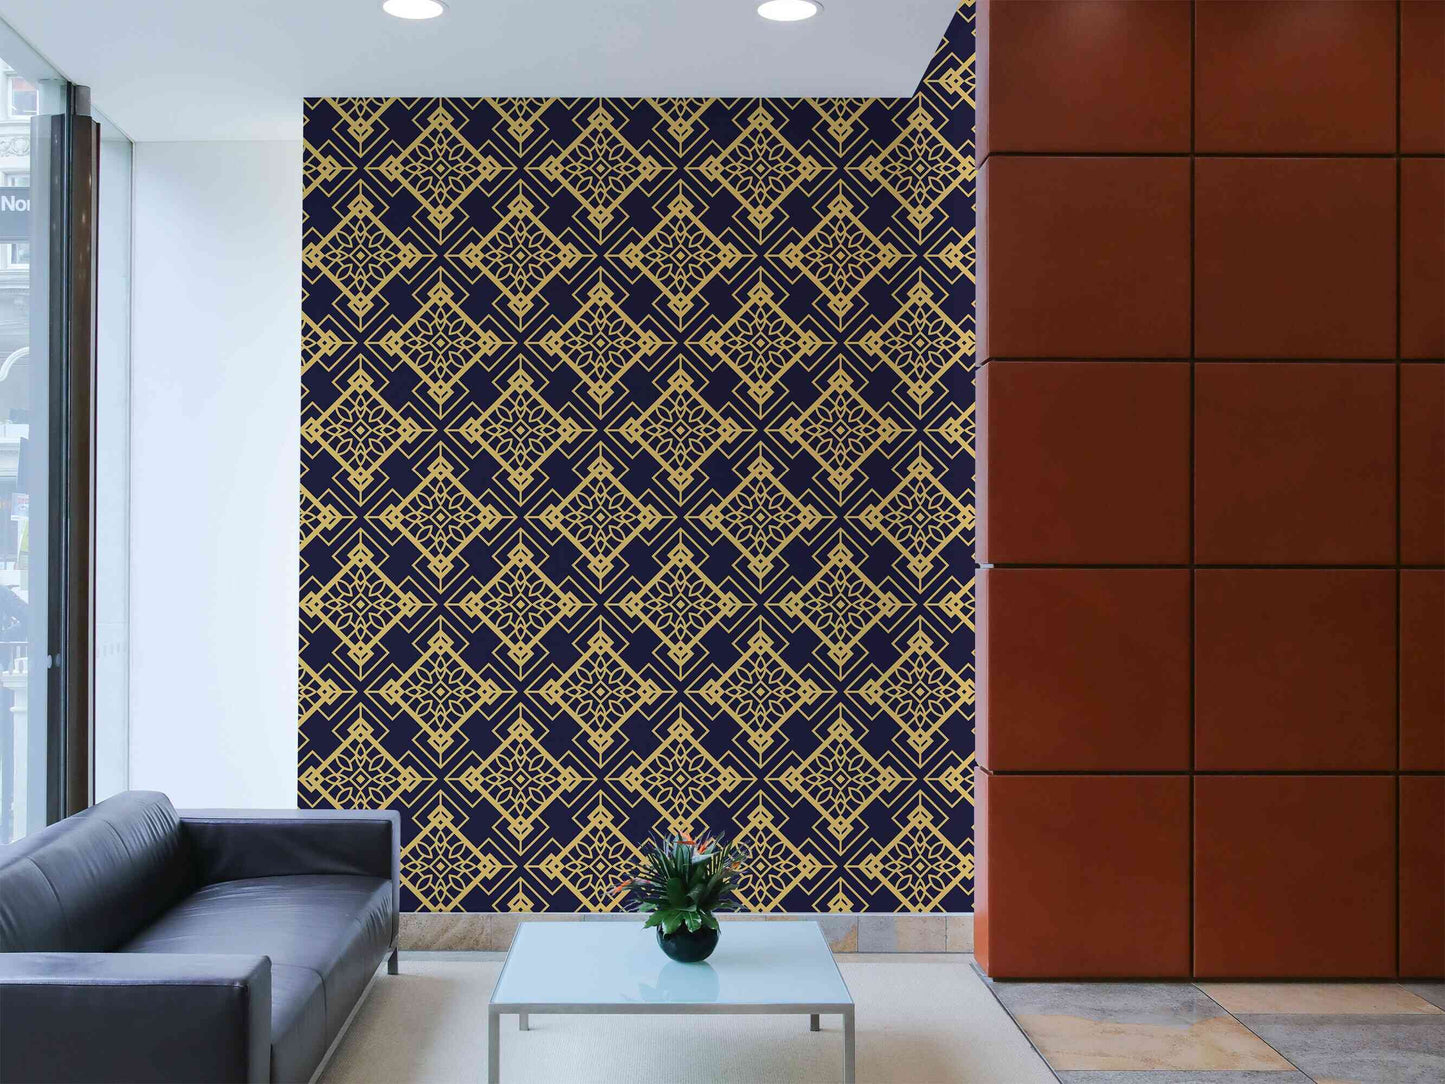 Mural art decor wallpaper for an artistic and stylish touch to your home